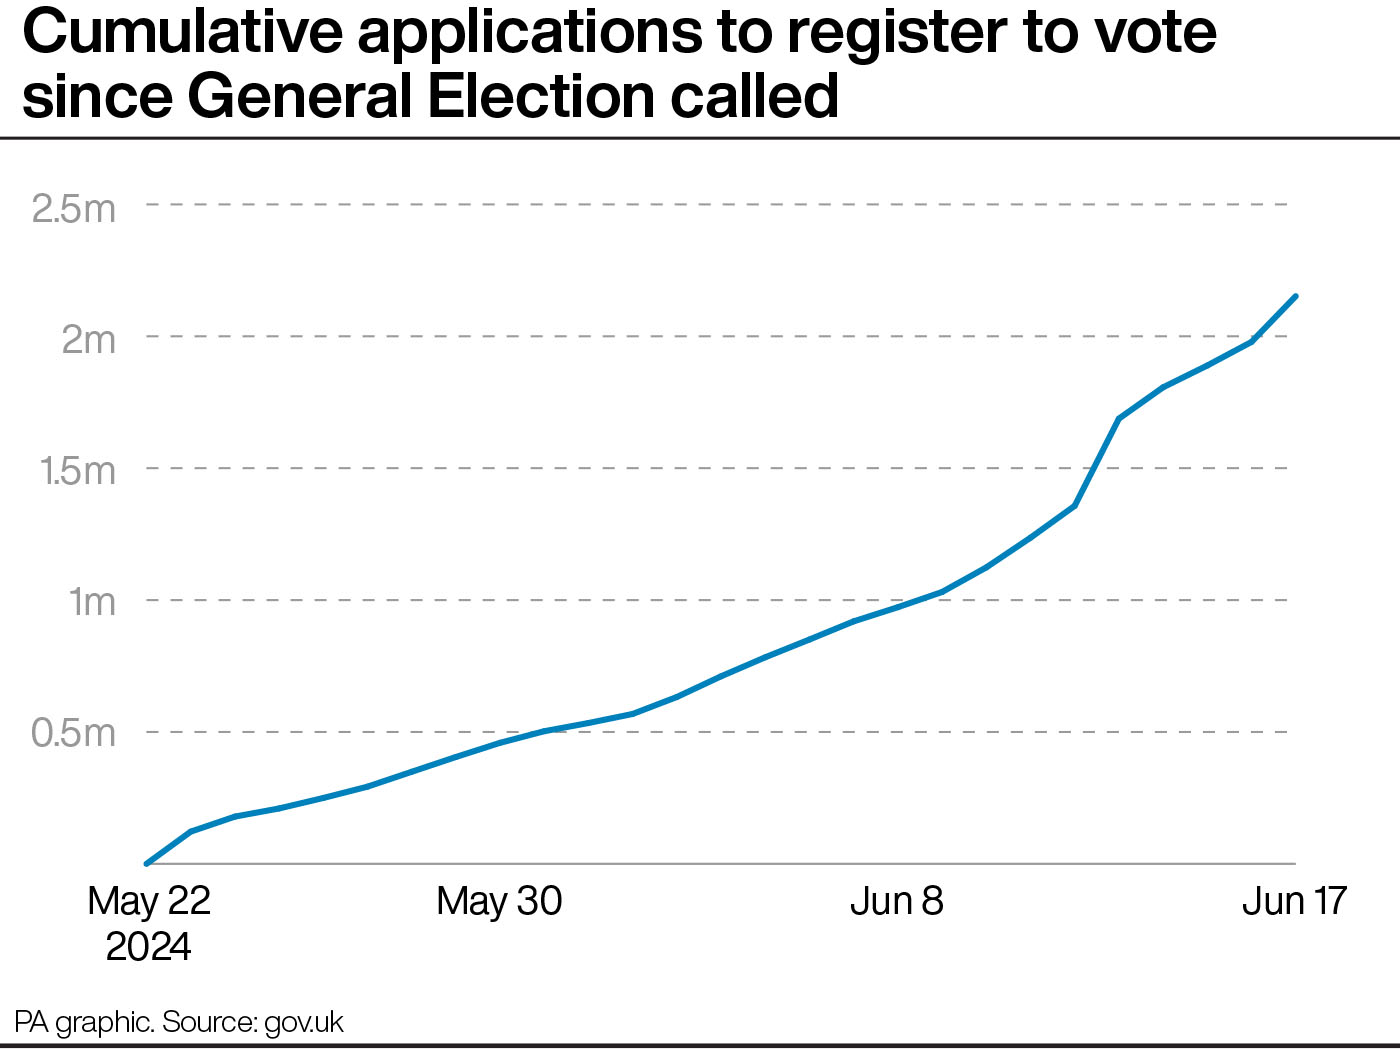 A graph showing the cumulative applications to register to vote since the General Election was called